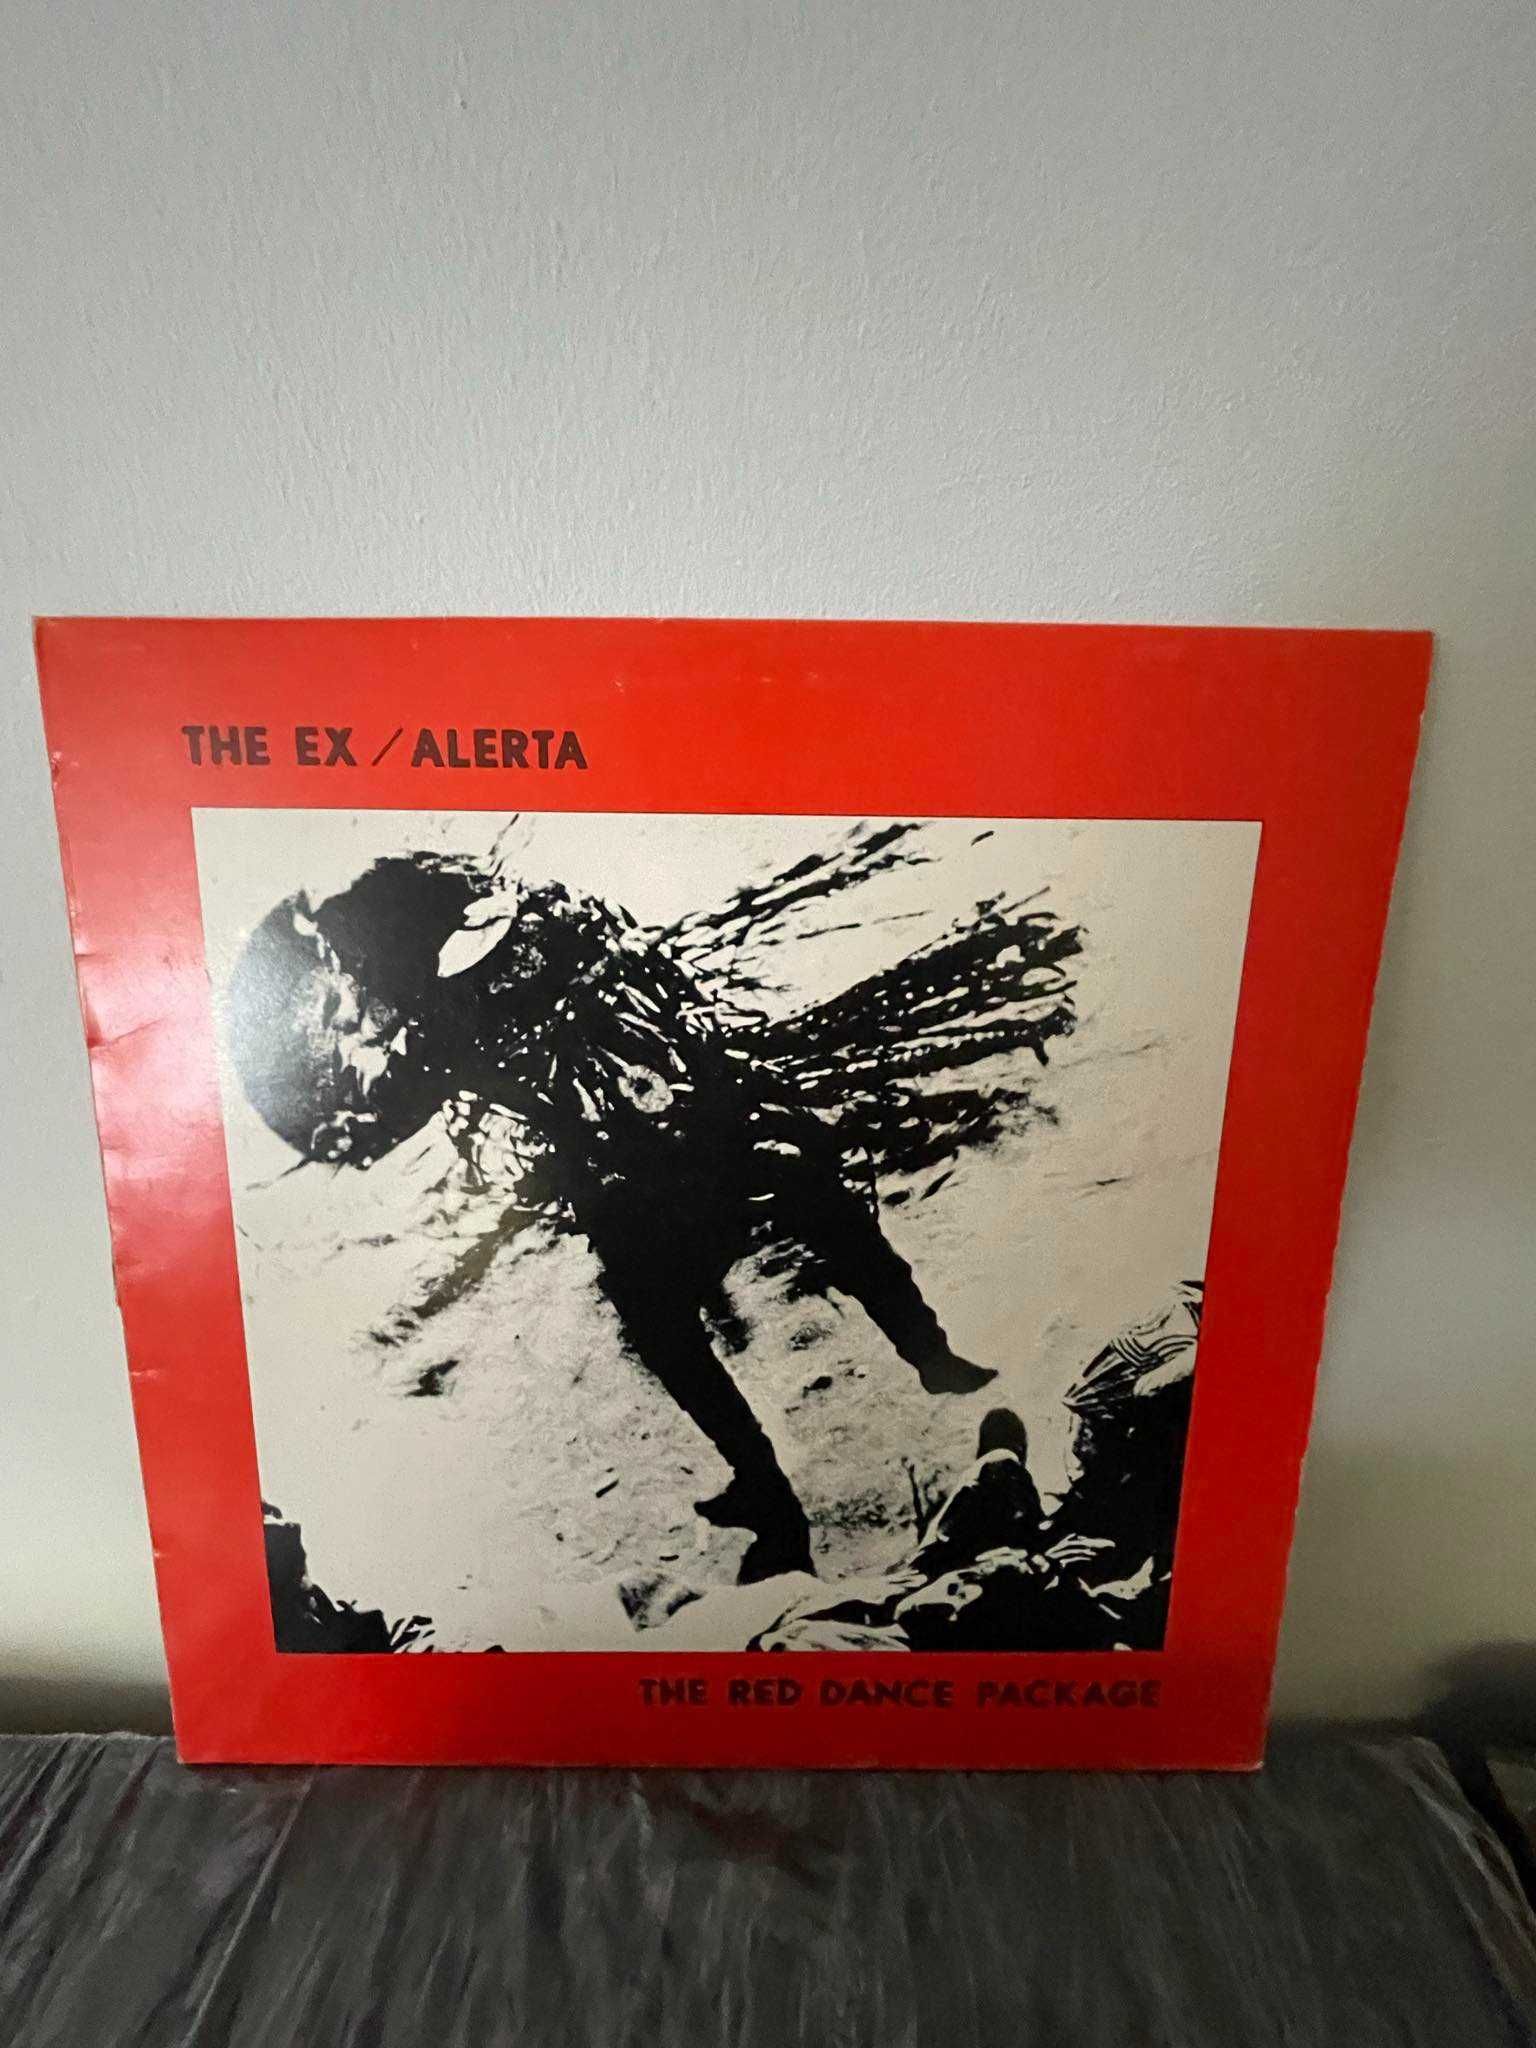 The Ex / Alerta – The Red Dance Package